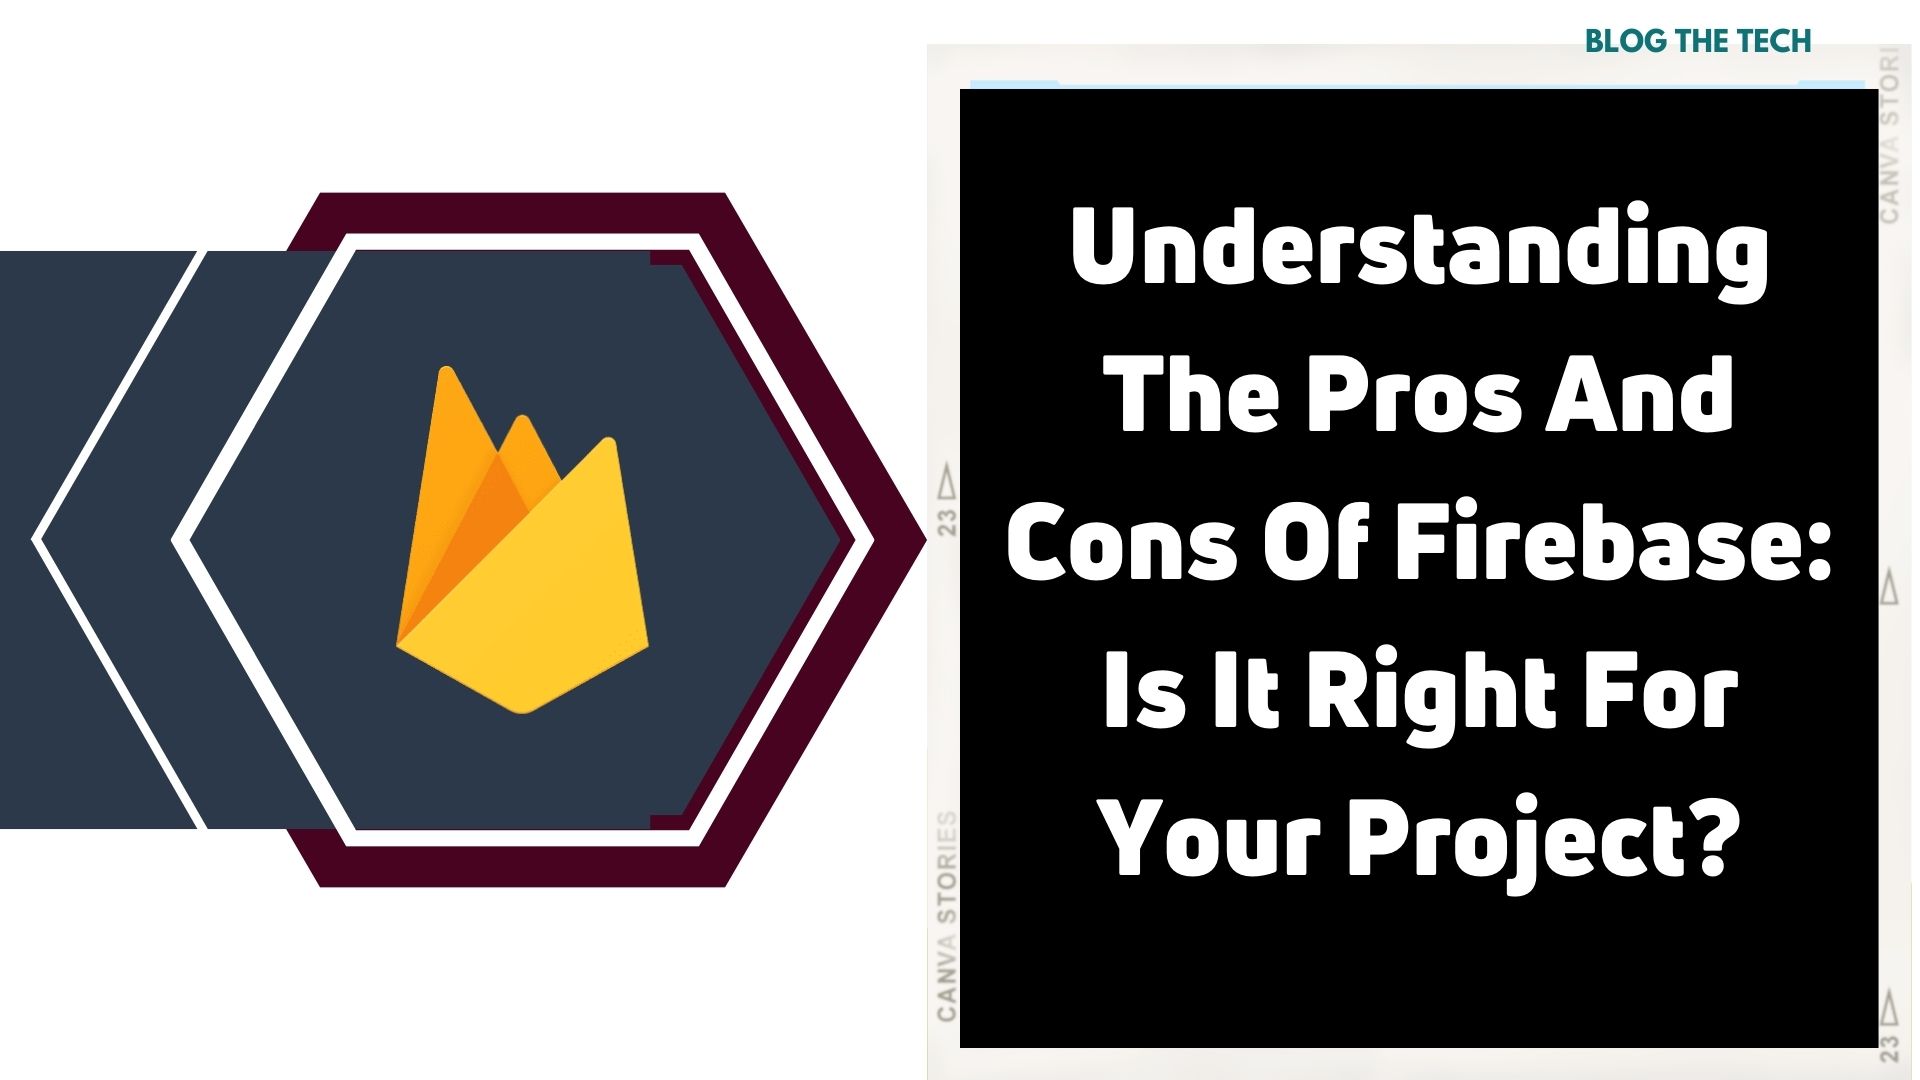 pros-and-cons-of-firebase-featured